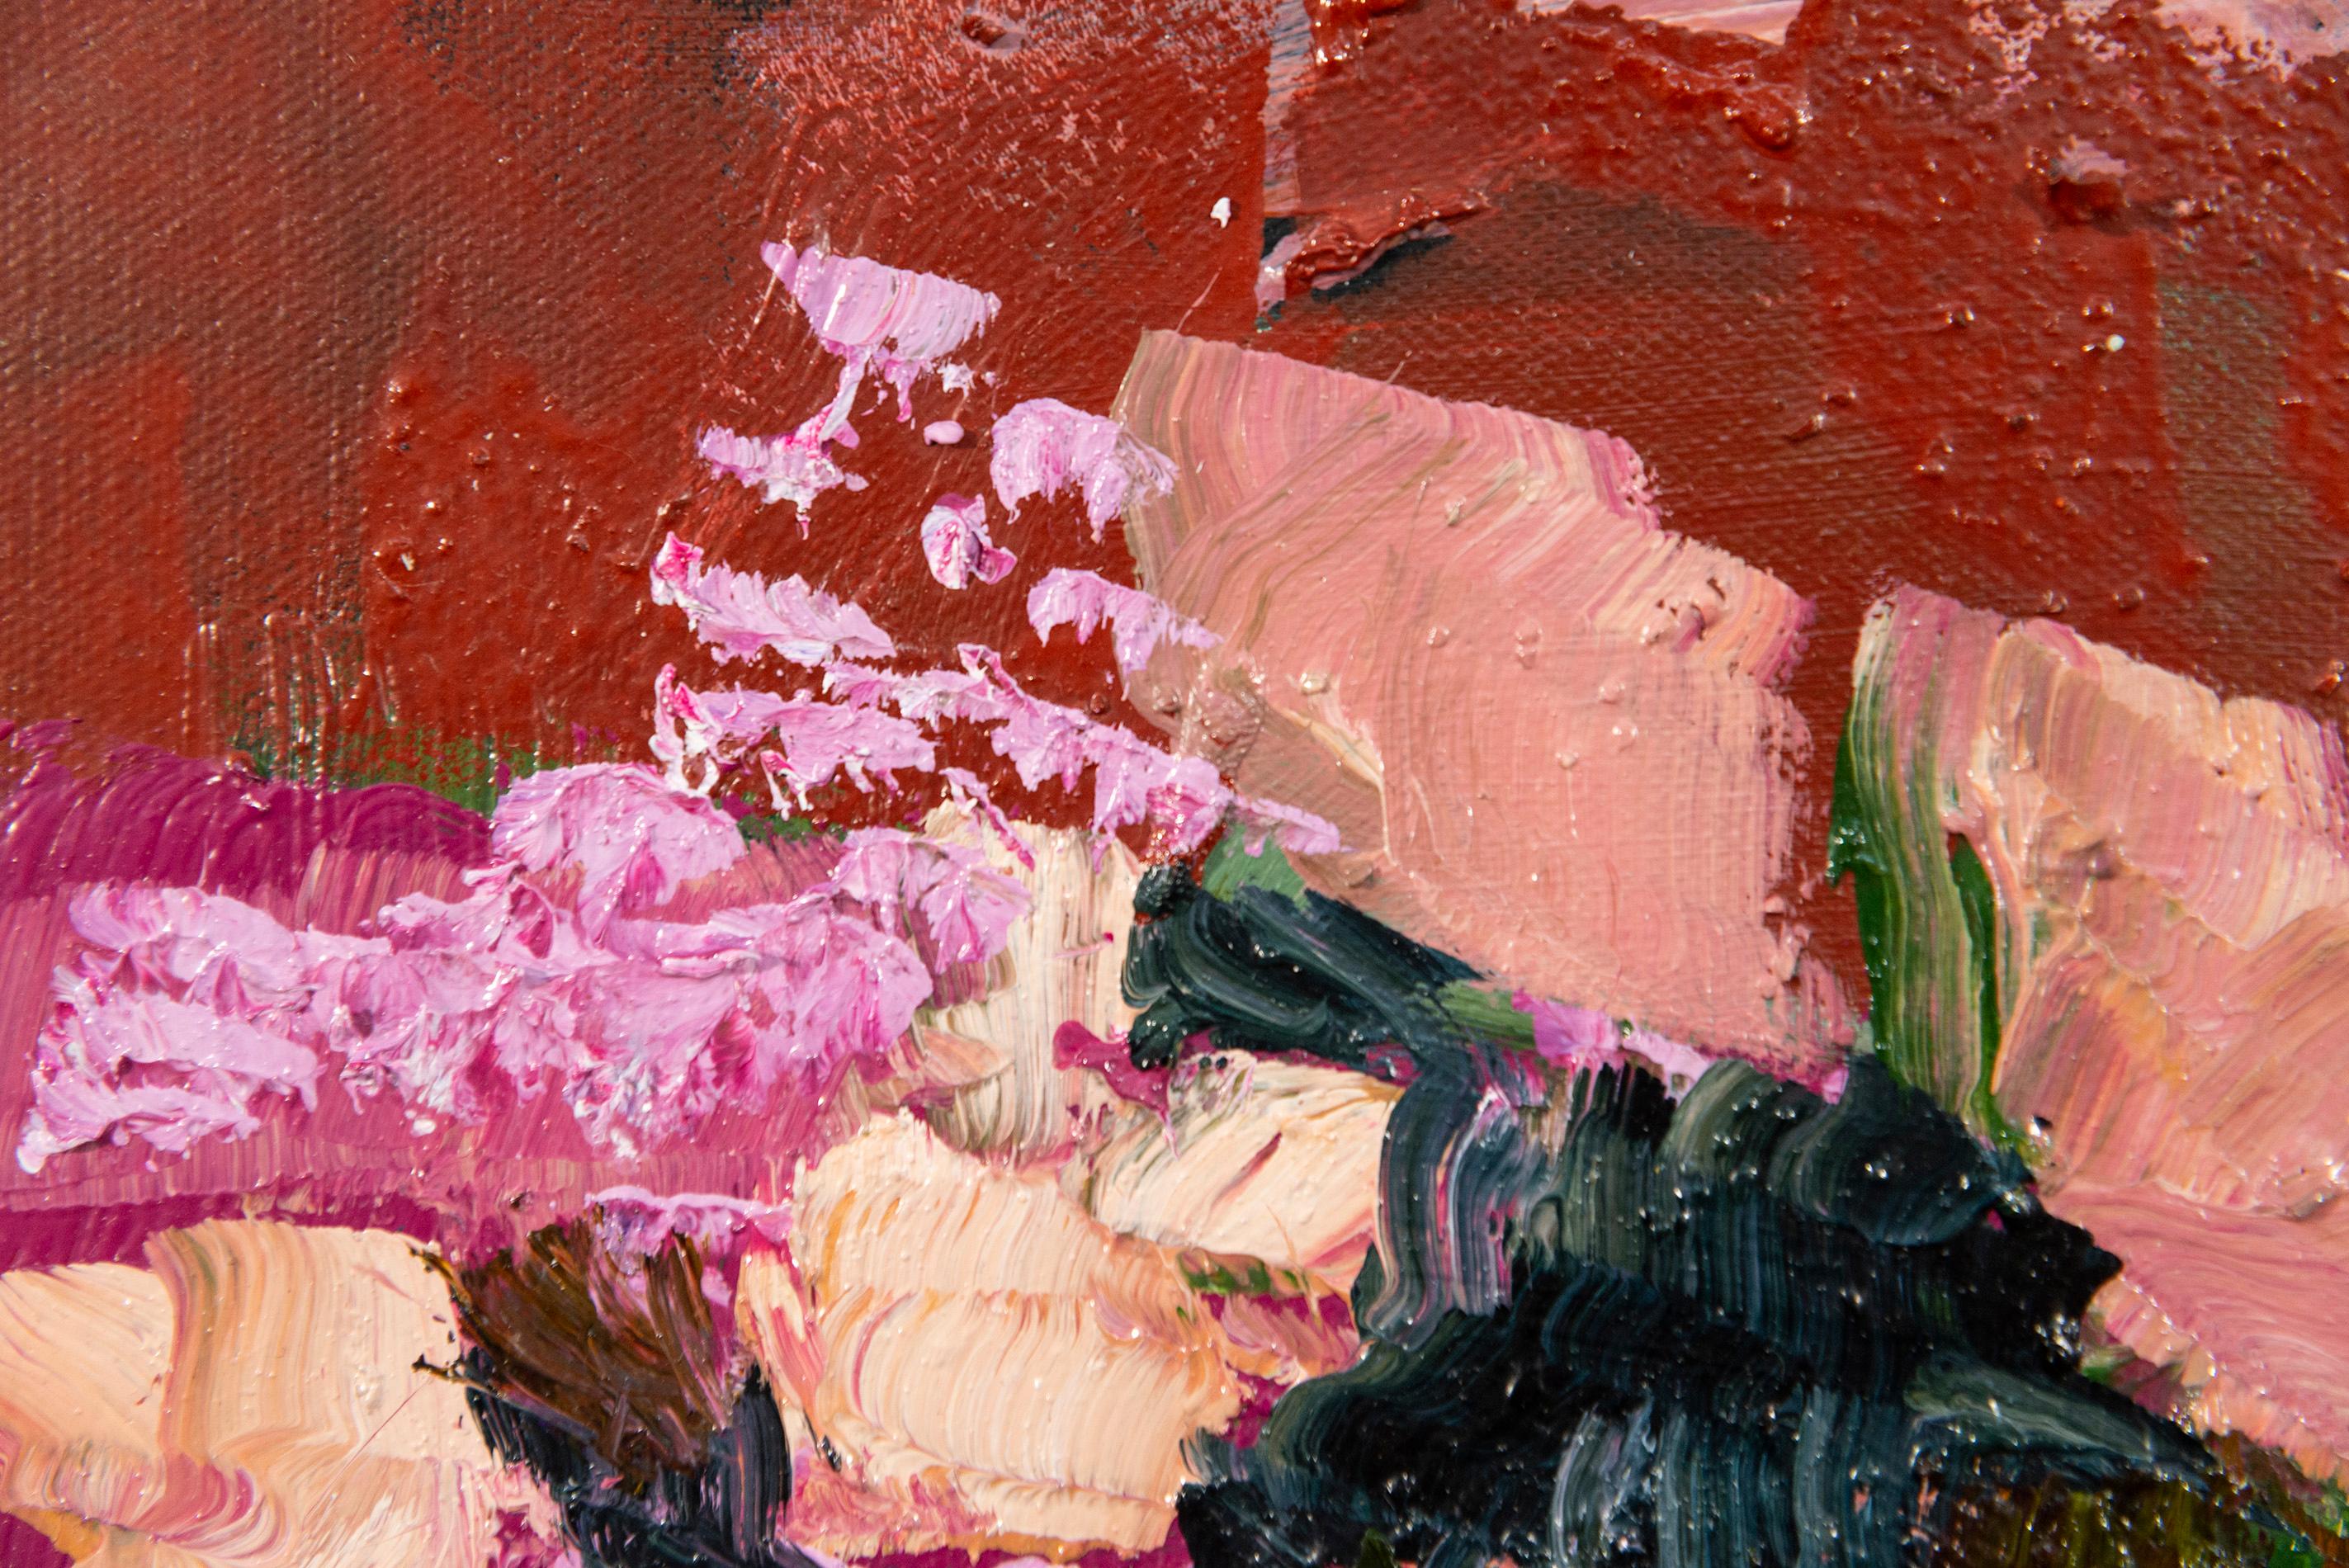 British born artist Jennifer Hornyak has re-imagined the traditional still life in a series of abstract, richly coloured florals. Her palette—this oil on canvas in fuchsia, pink, purple, blue, burnt orange and green echoes classical influences. The